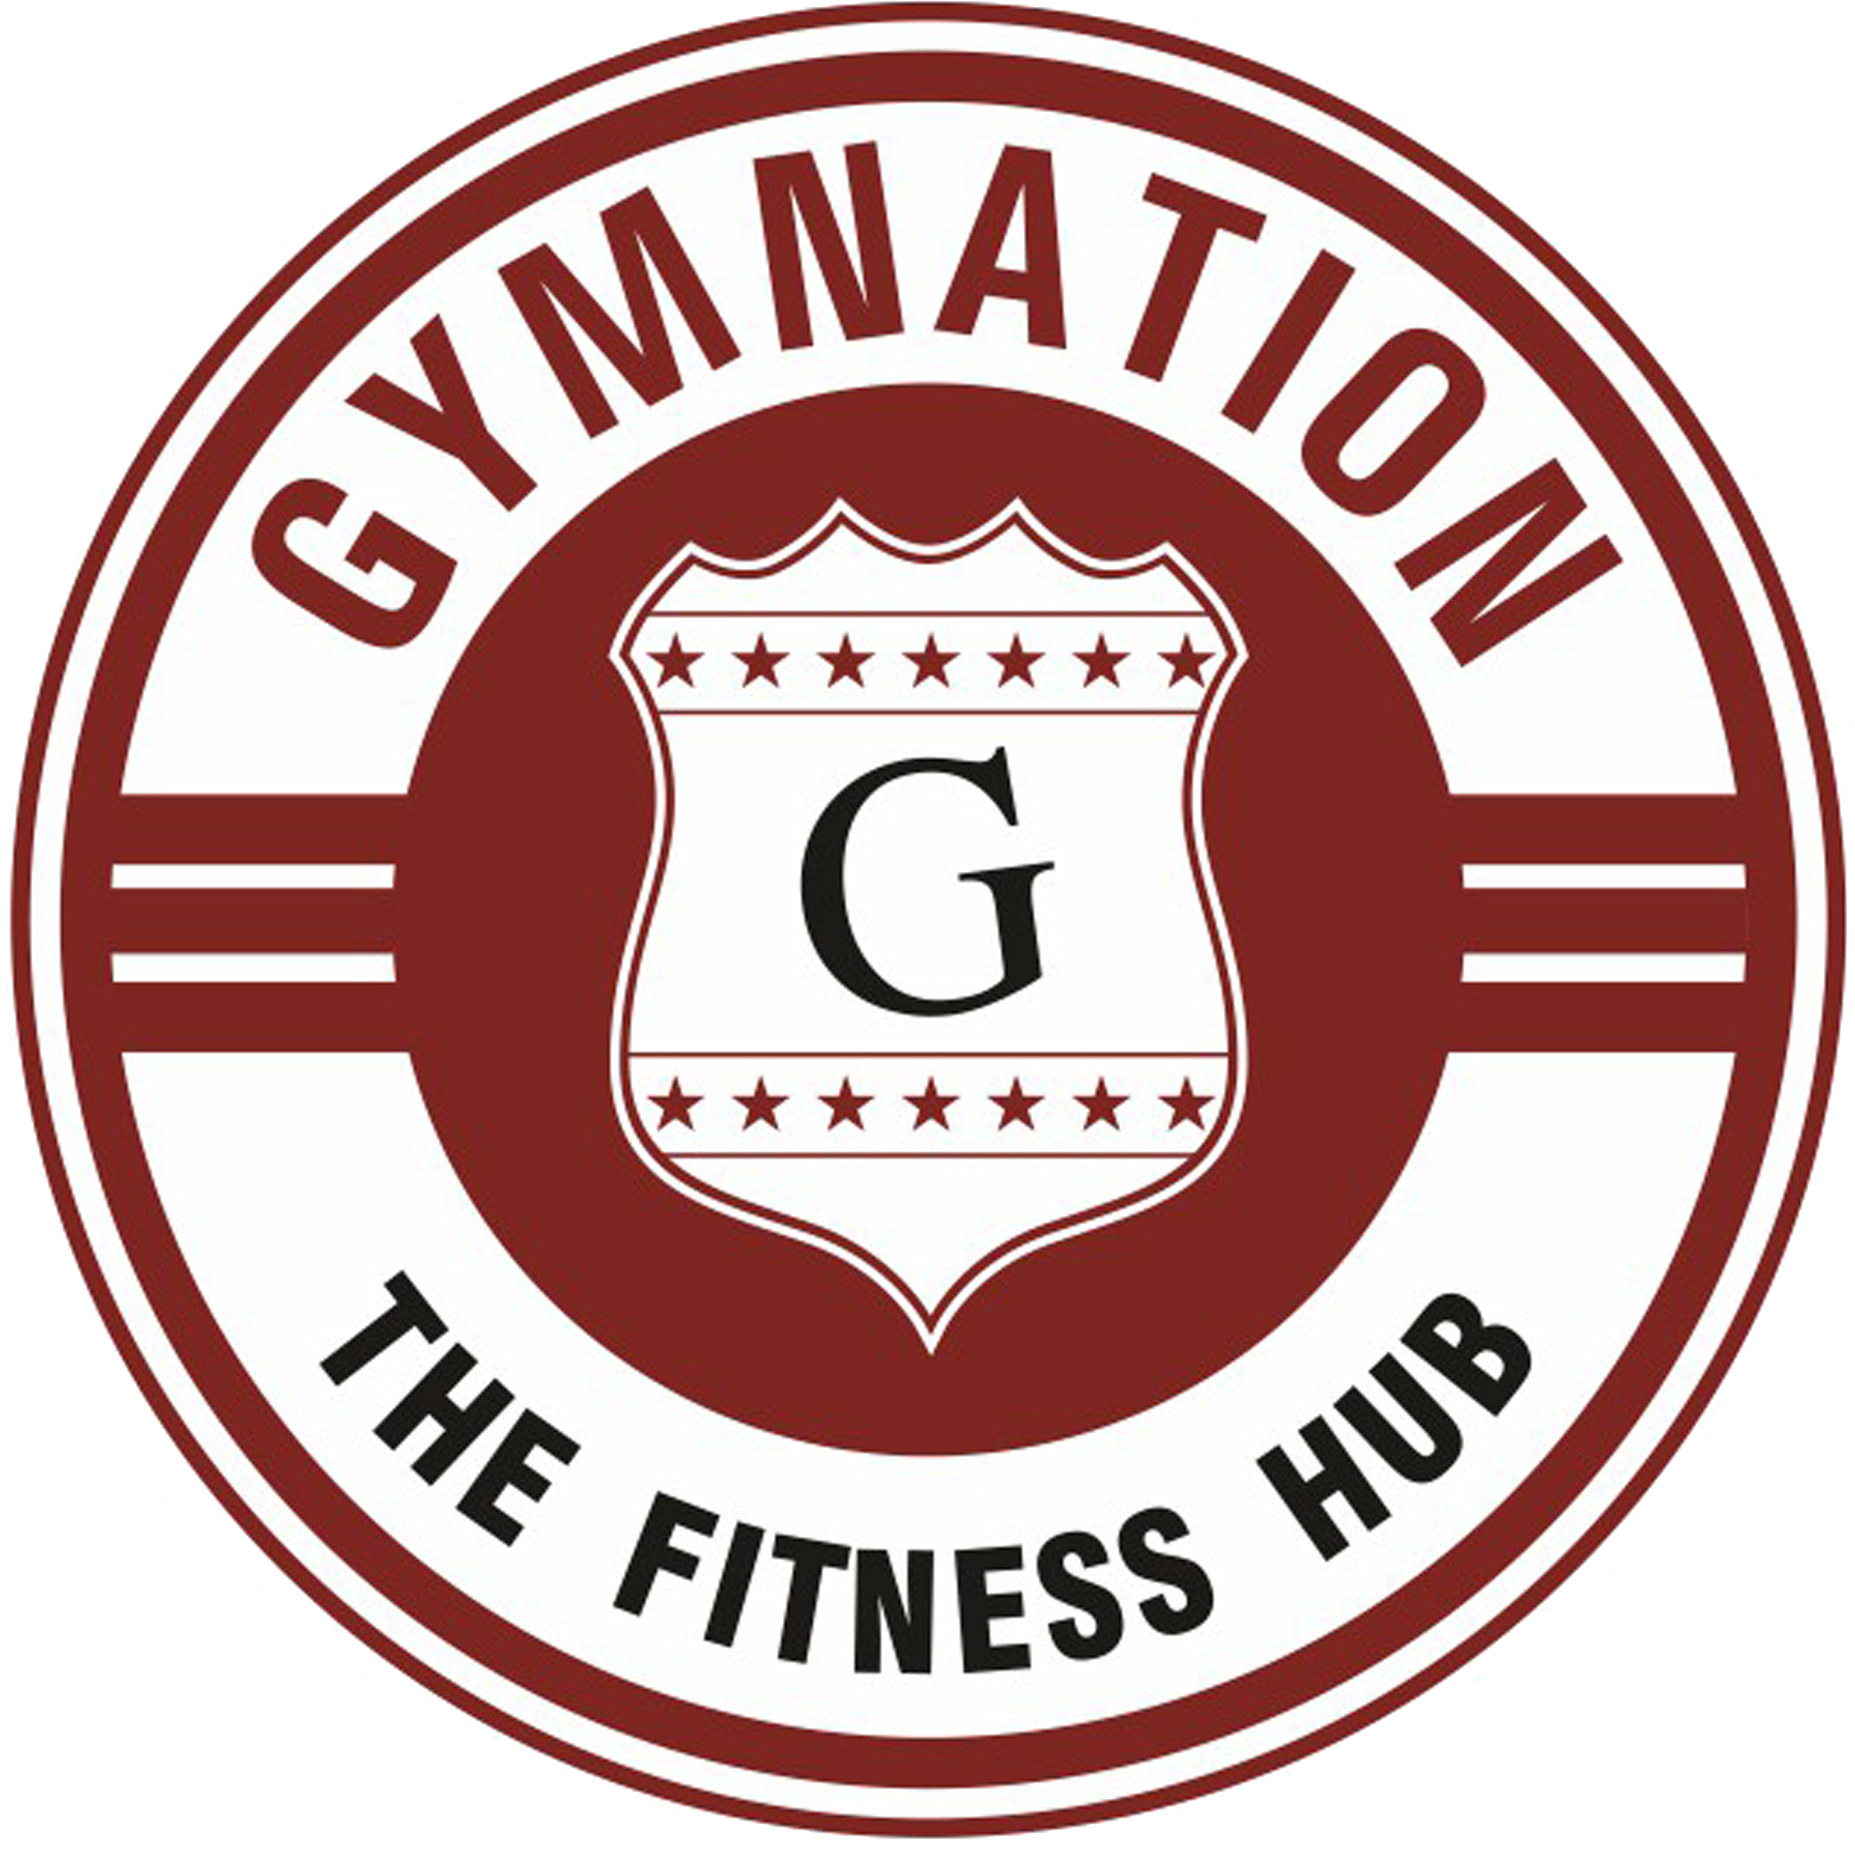 Gymnation the fitness hub|Gym and Fitness Centre|Active Life